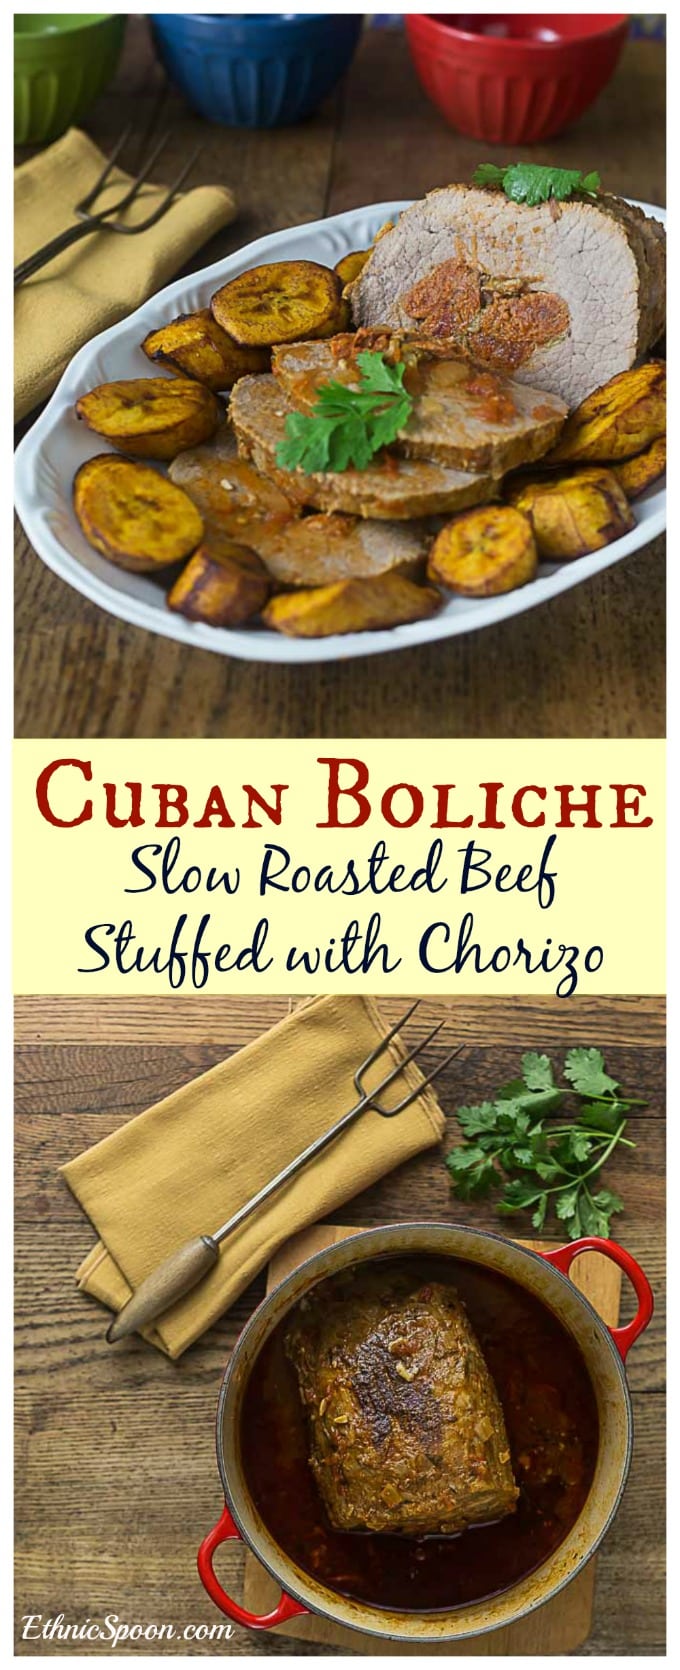 How to make Cuban boliche: A marinated roasted beef stuffed with chorizo and olives then show roasted. A great recipe for the slow cooker. | ethnicspoon.com